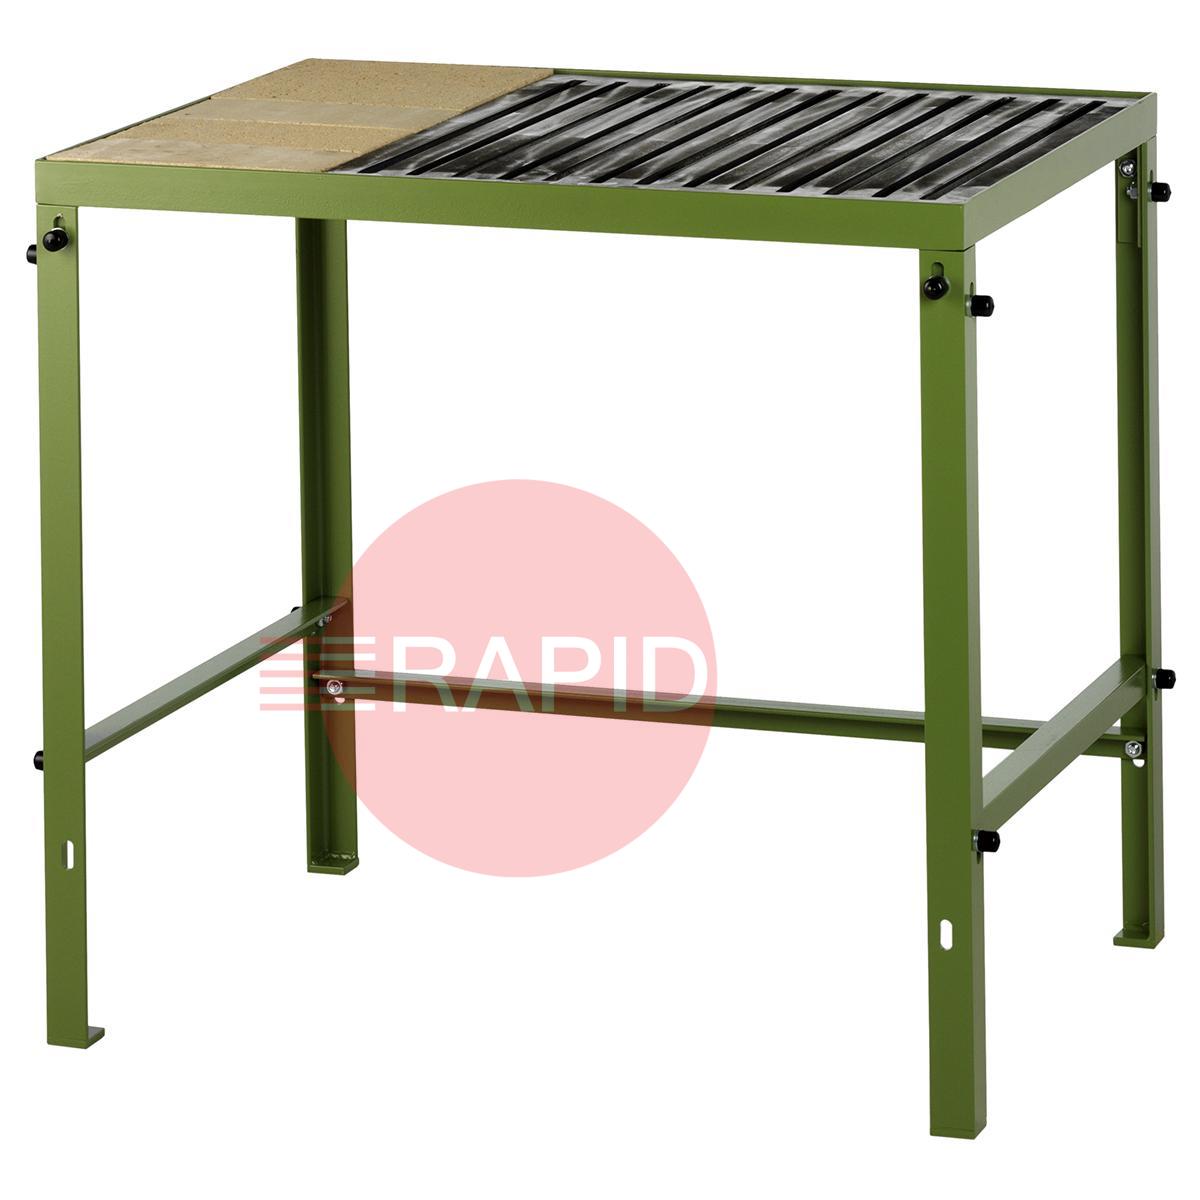 45.41.01.6385  CEPRO Welding Table with Metal Grill and Fire Proof Brick, H - 80cm x D - 63cm x L - 85cm